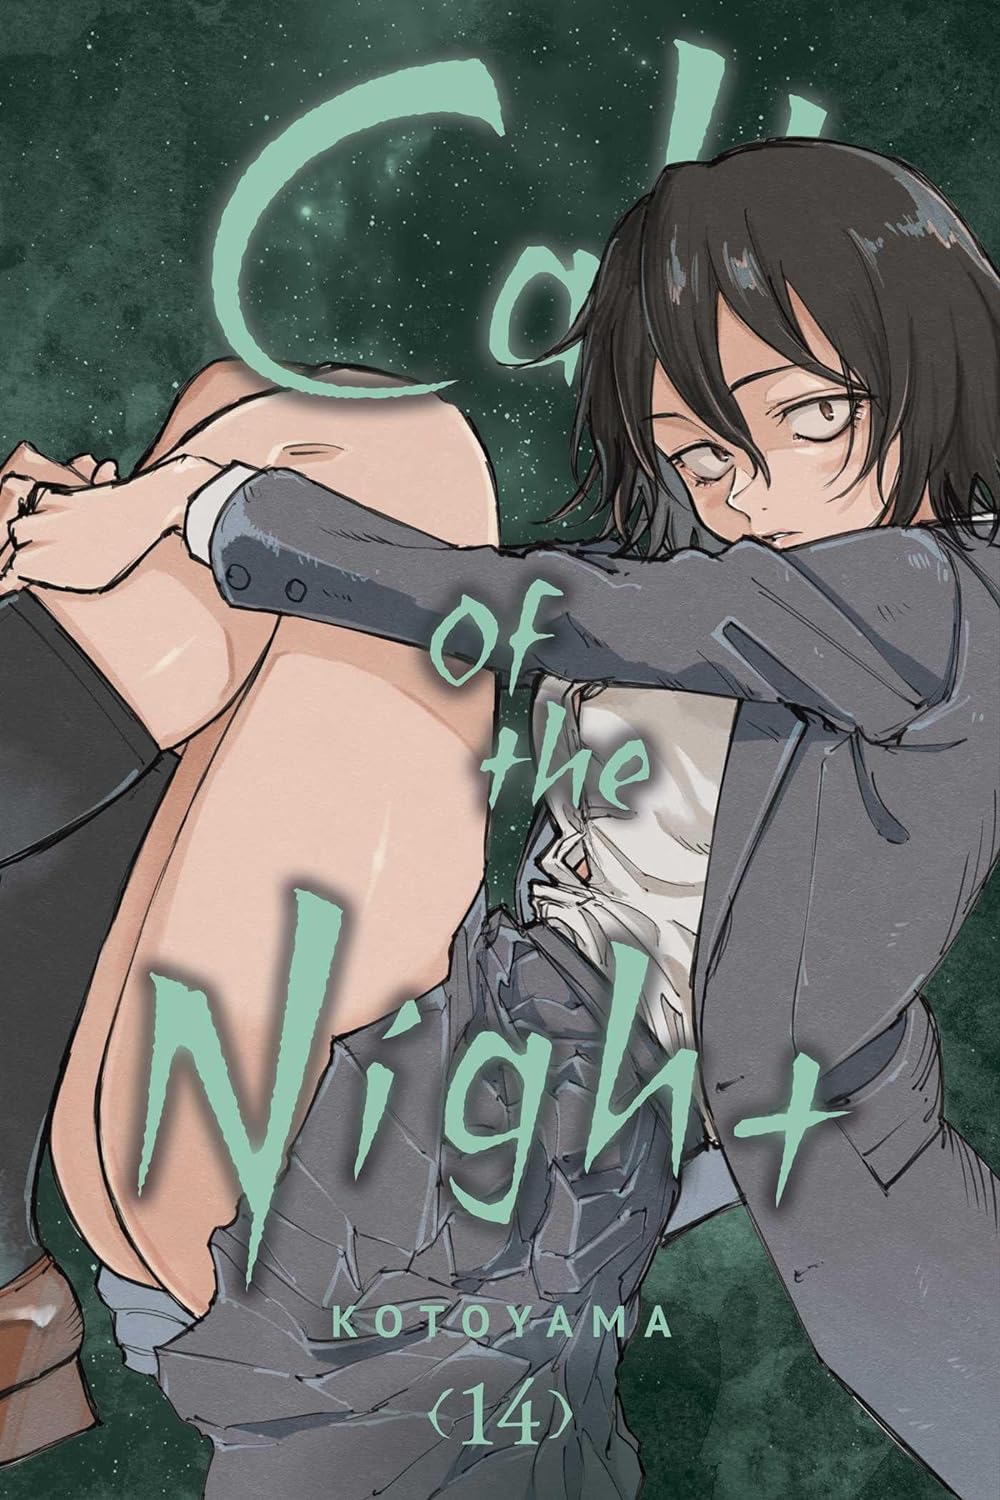 Call of the Night Vol. 14